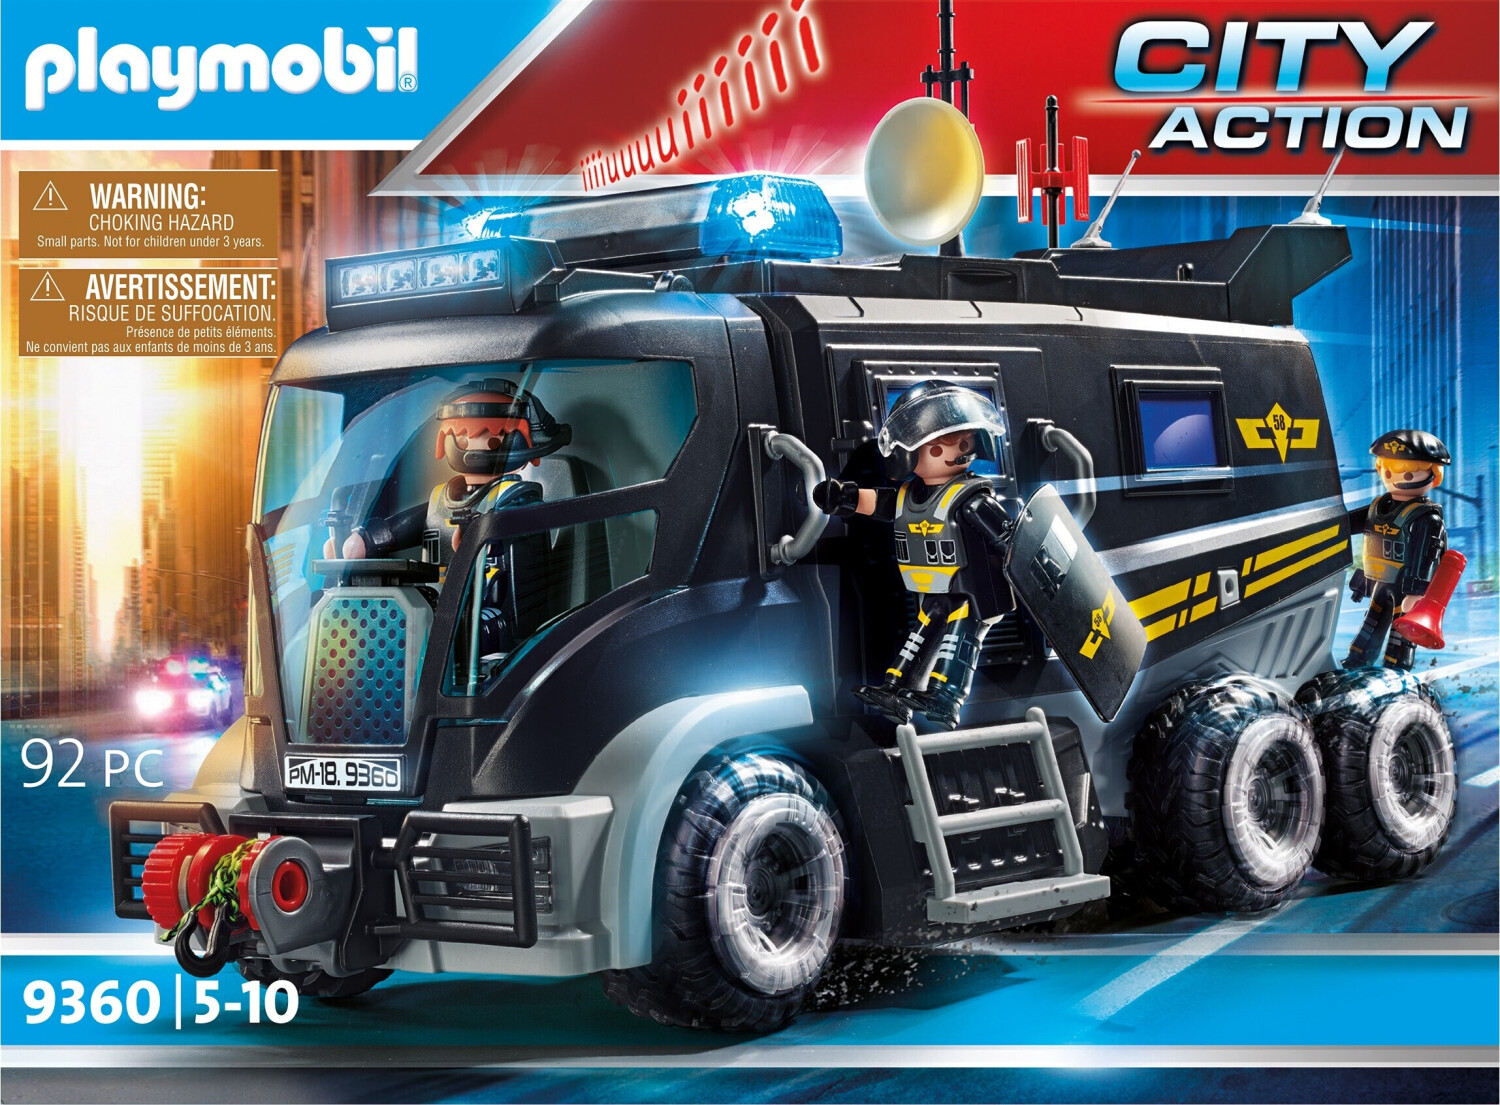 PLAYMOBIL LOT GROS Fourgon CAMION POLICE Policier Elicoptere